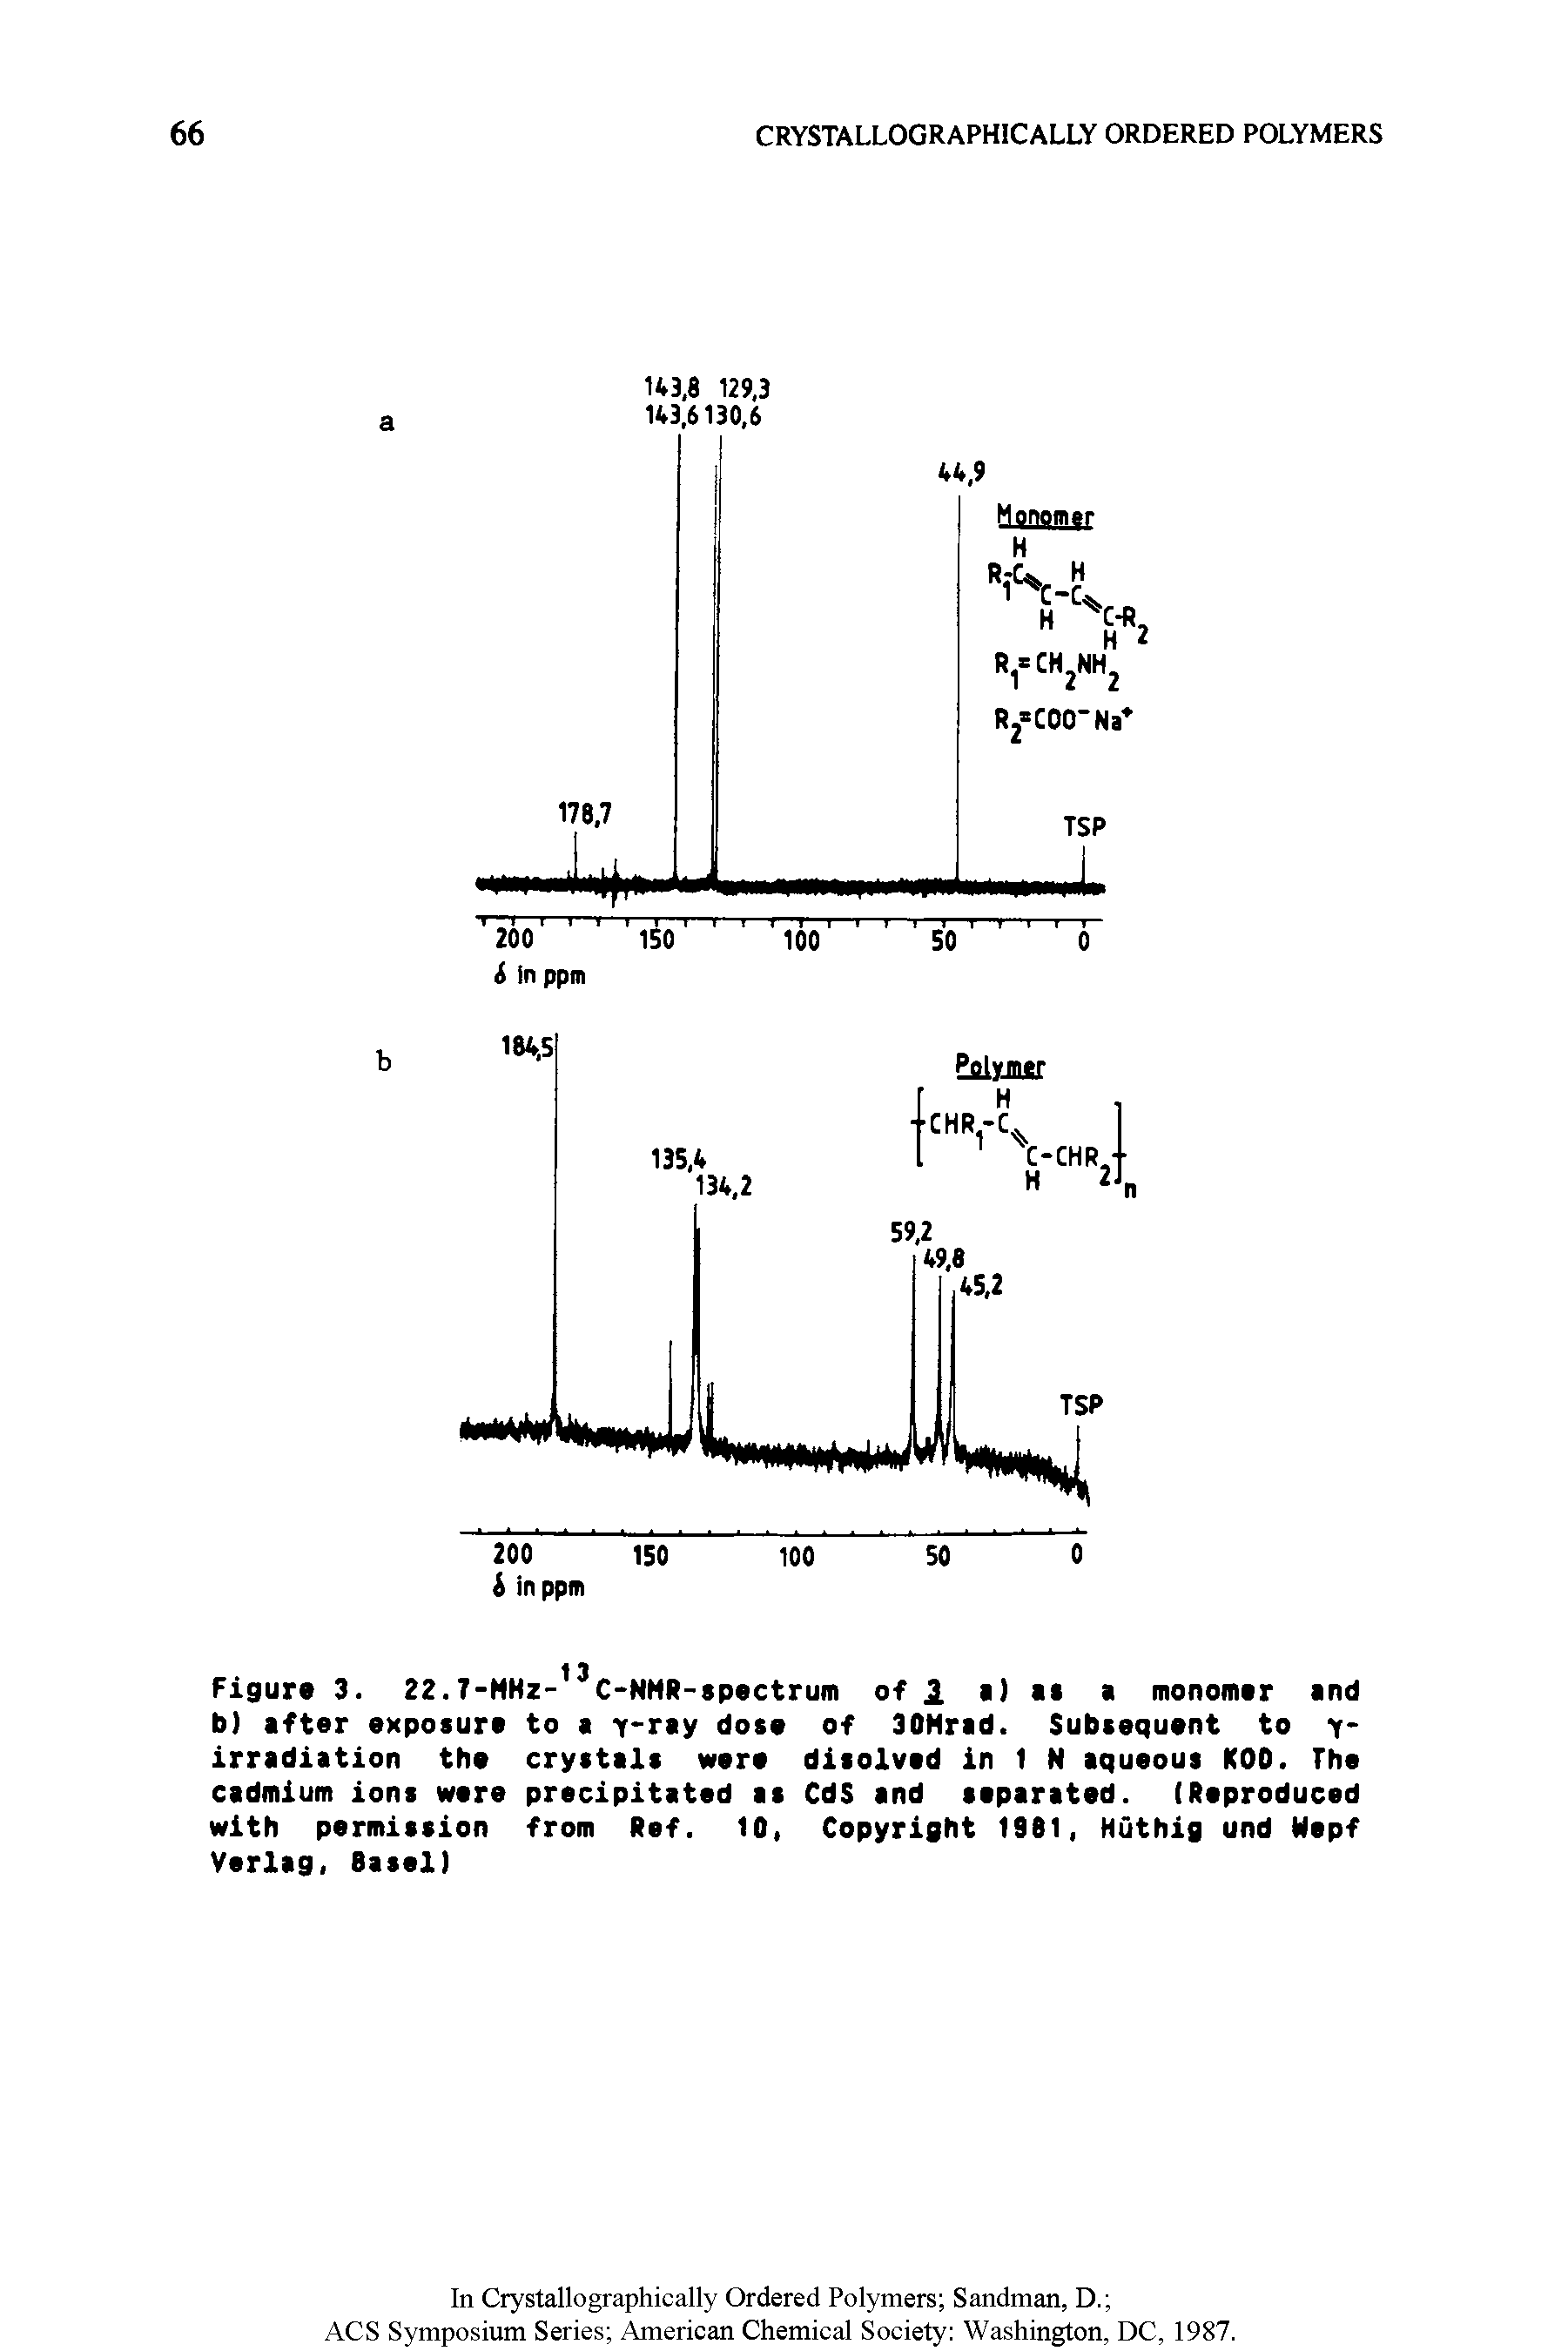 Figure 3. 22.7-NHz- C-NHR-spectruin of 1 1) at a monomar and b) after exposure to a Y ray dose of 30Hrad. Subsequent to y irradiation the crystals were disolved in 1 N aqueous KOO. The cadmium ions wore precipitated as CdS and separated. (Reproduced with permission from Ref. 10, Copyright 1981, Huthig und Mepf Verlag, Basel)...